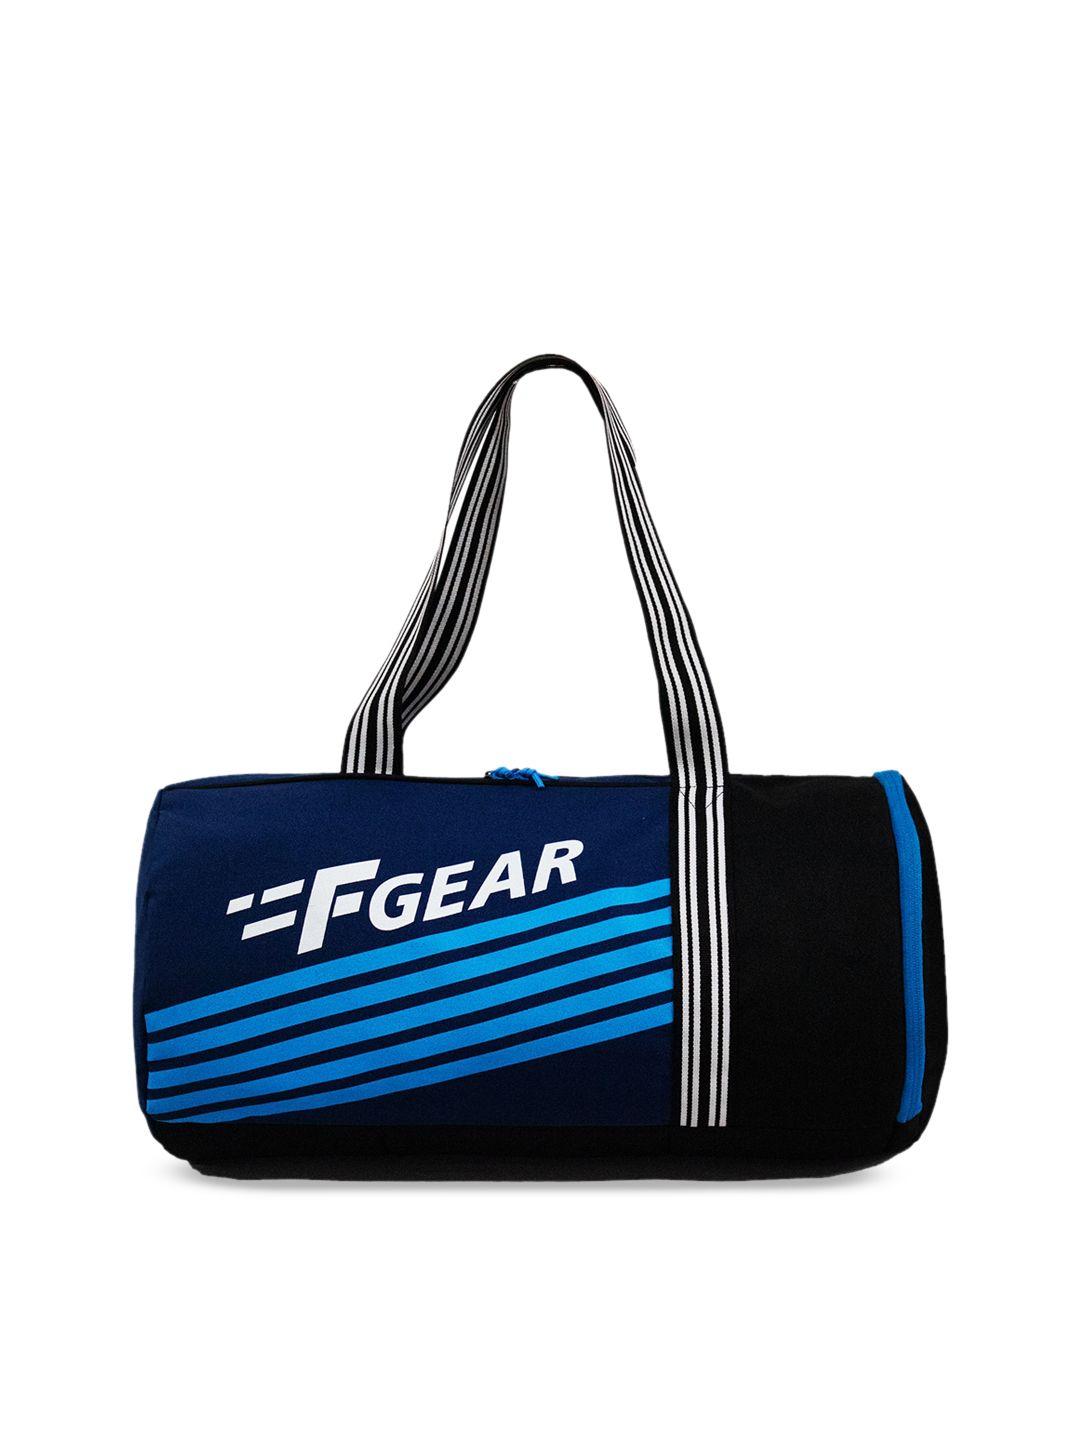 f gear navy blue & white printed workout gym duffle bag